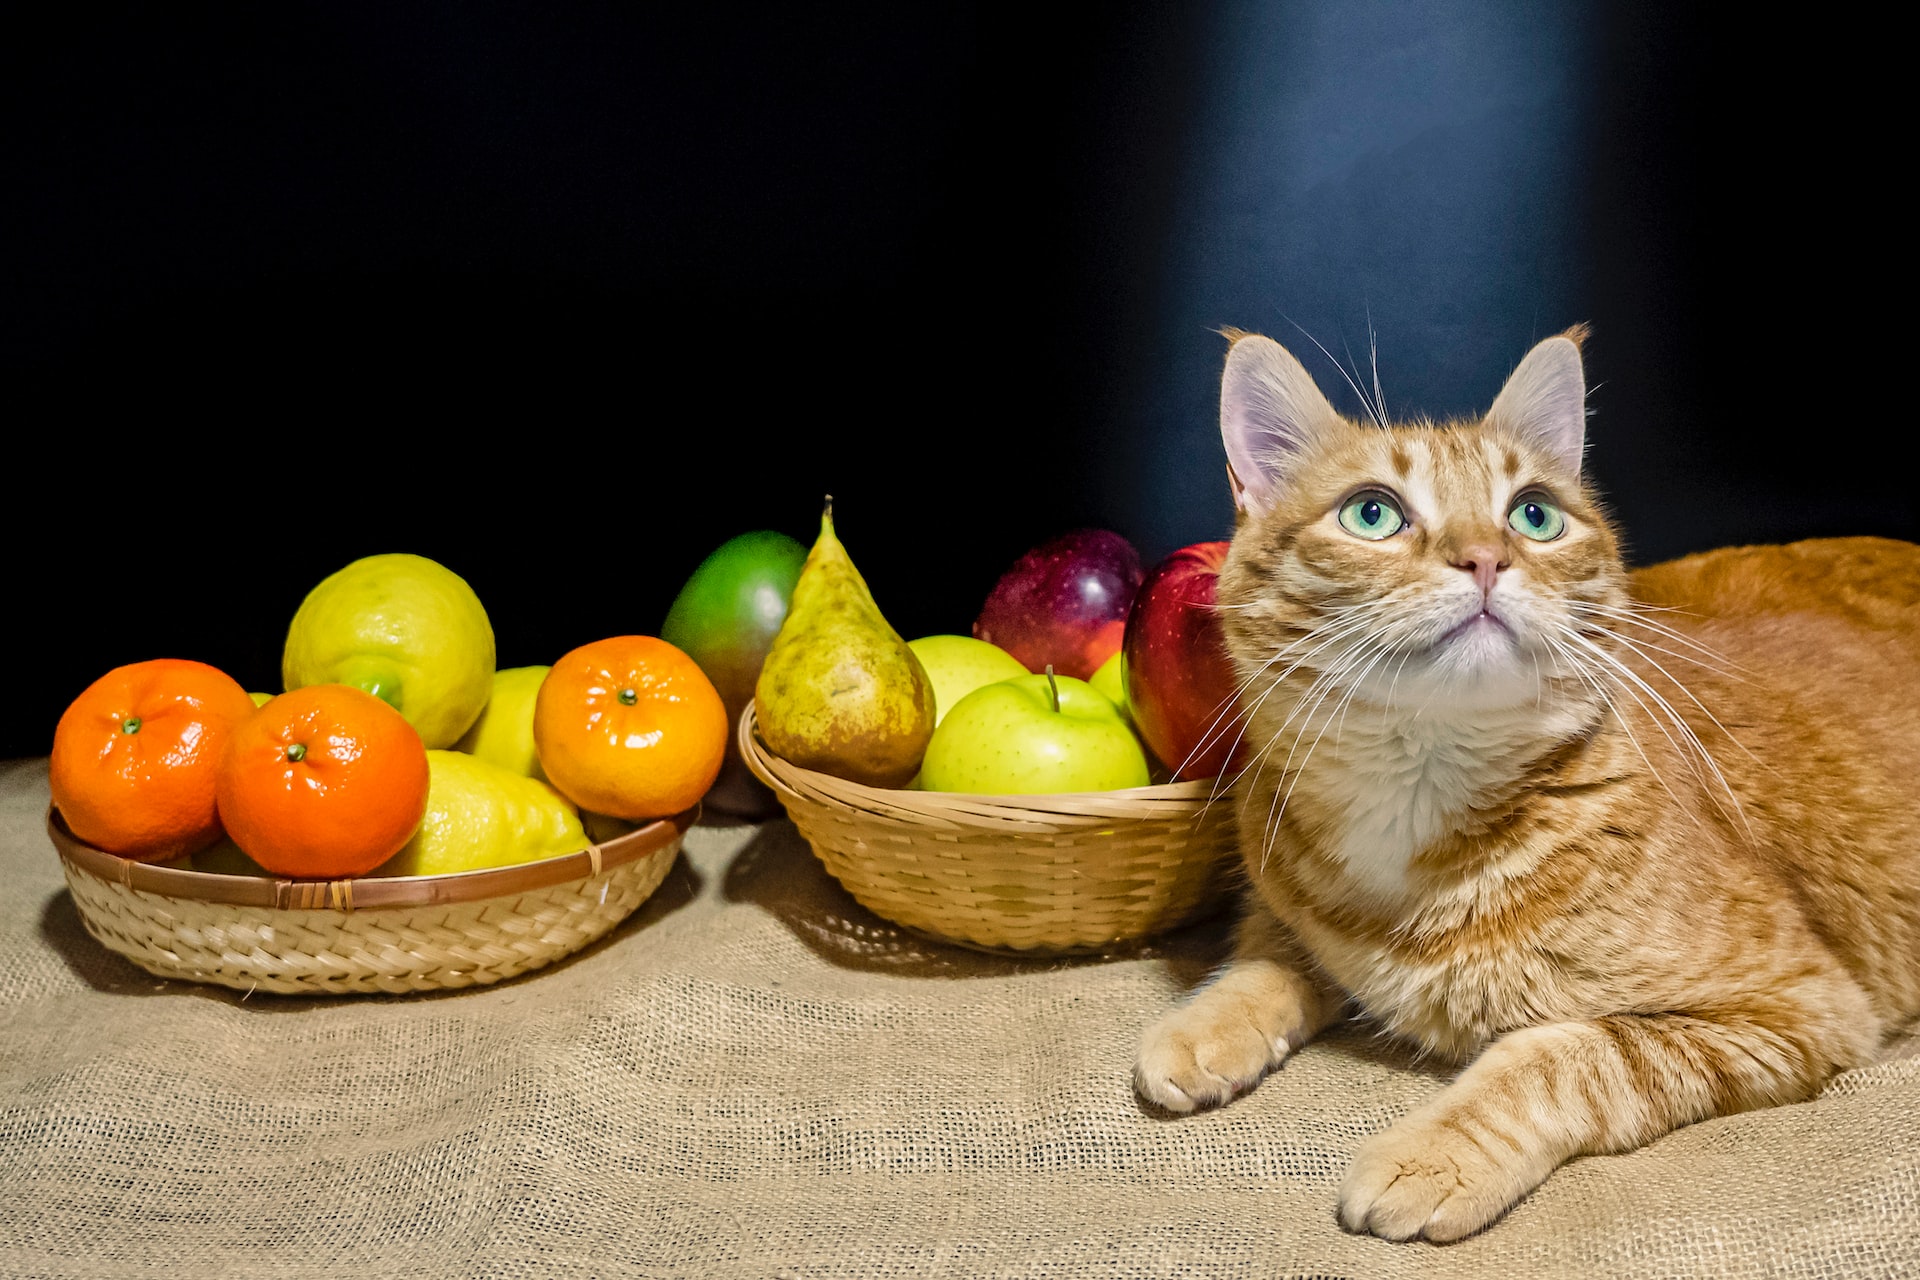 a cat sitting next to a basket of fruit